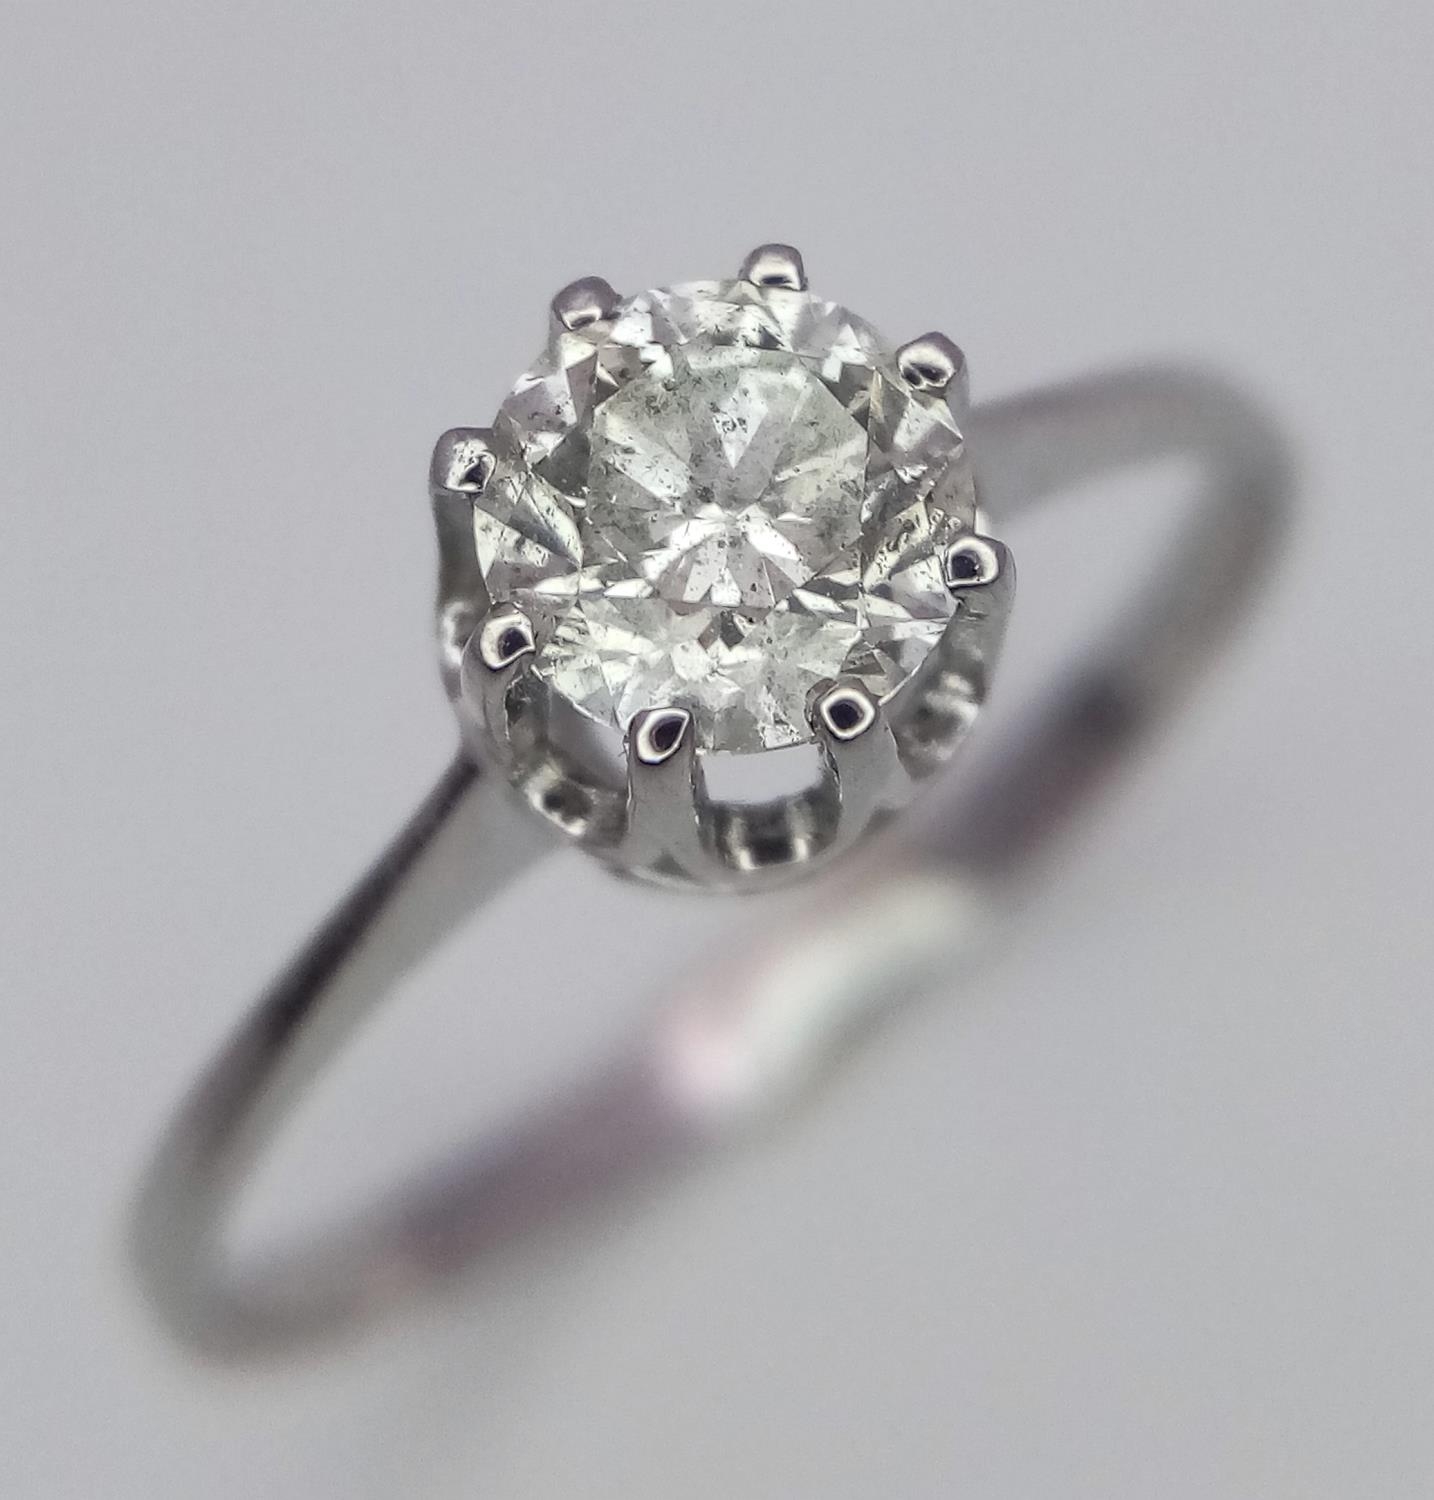 A 14K WHITE GOLD DIAMOND SOLITAIRE RING 0.33CT 1.5G SIZE O/P. BL 9001 - Image 2 of 5